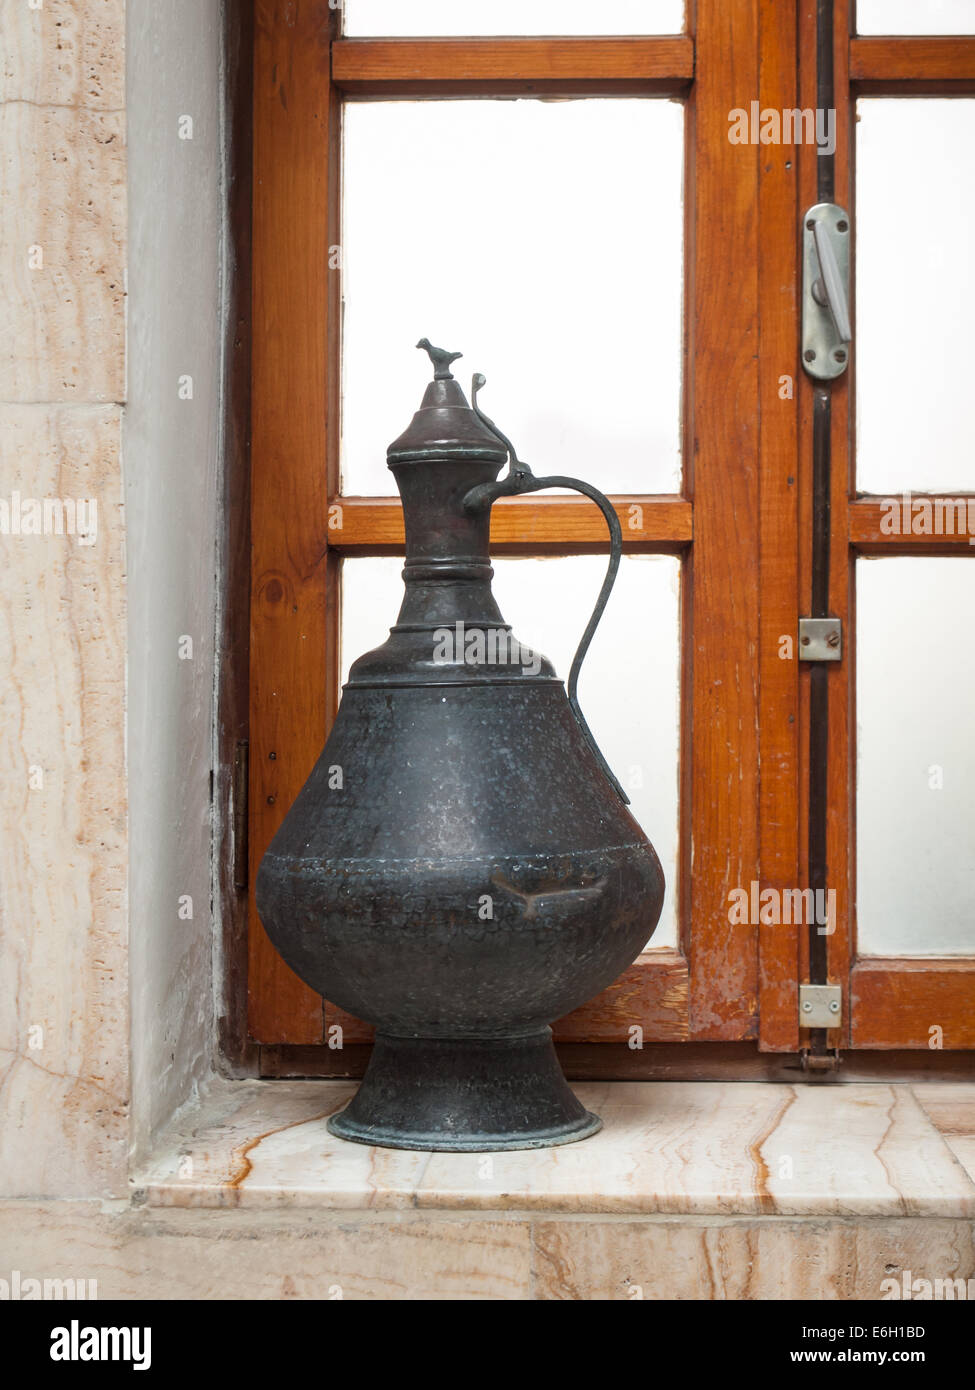 antique metal water jug on a bathroom windowsill in brown marble with frosted window behind Stock Photo